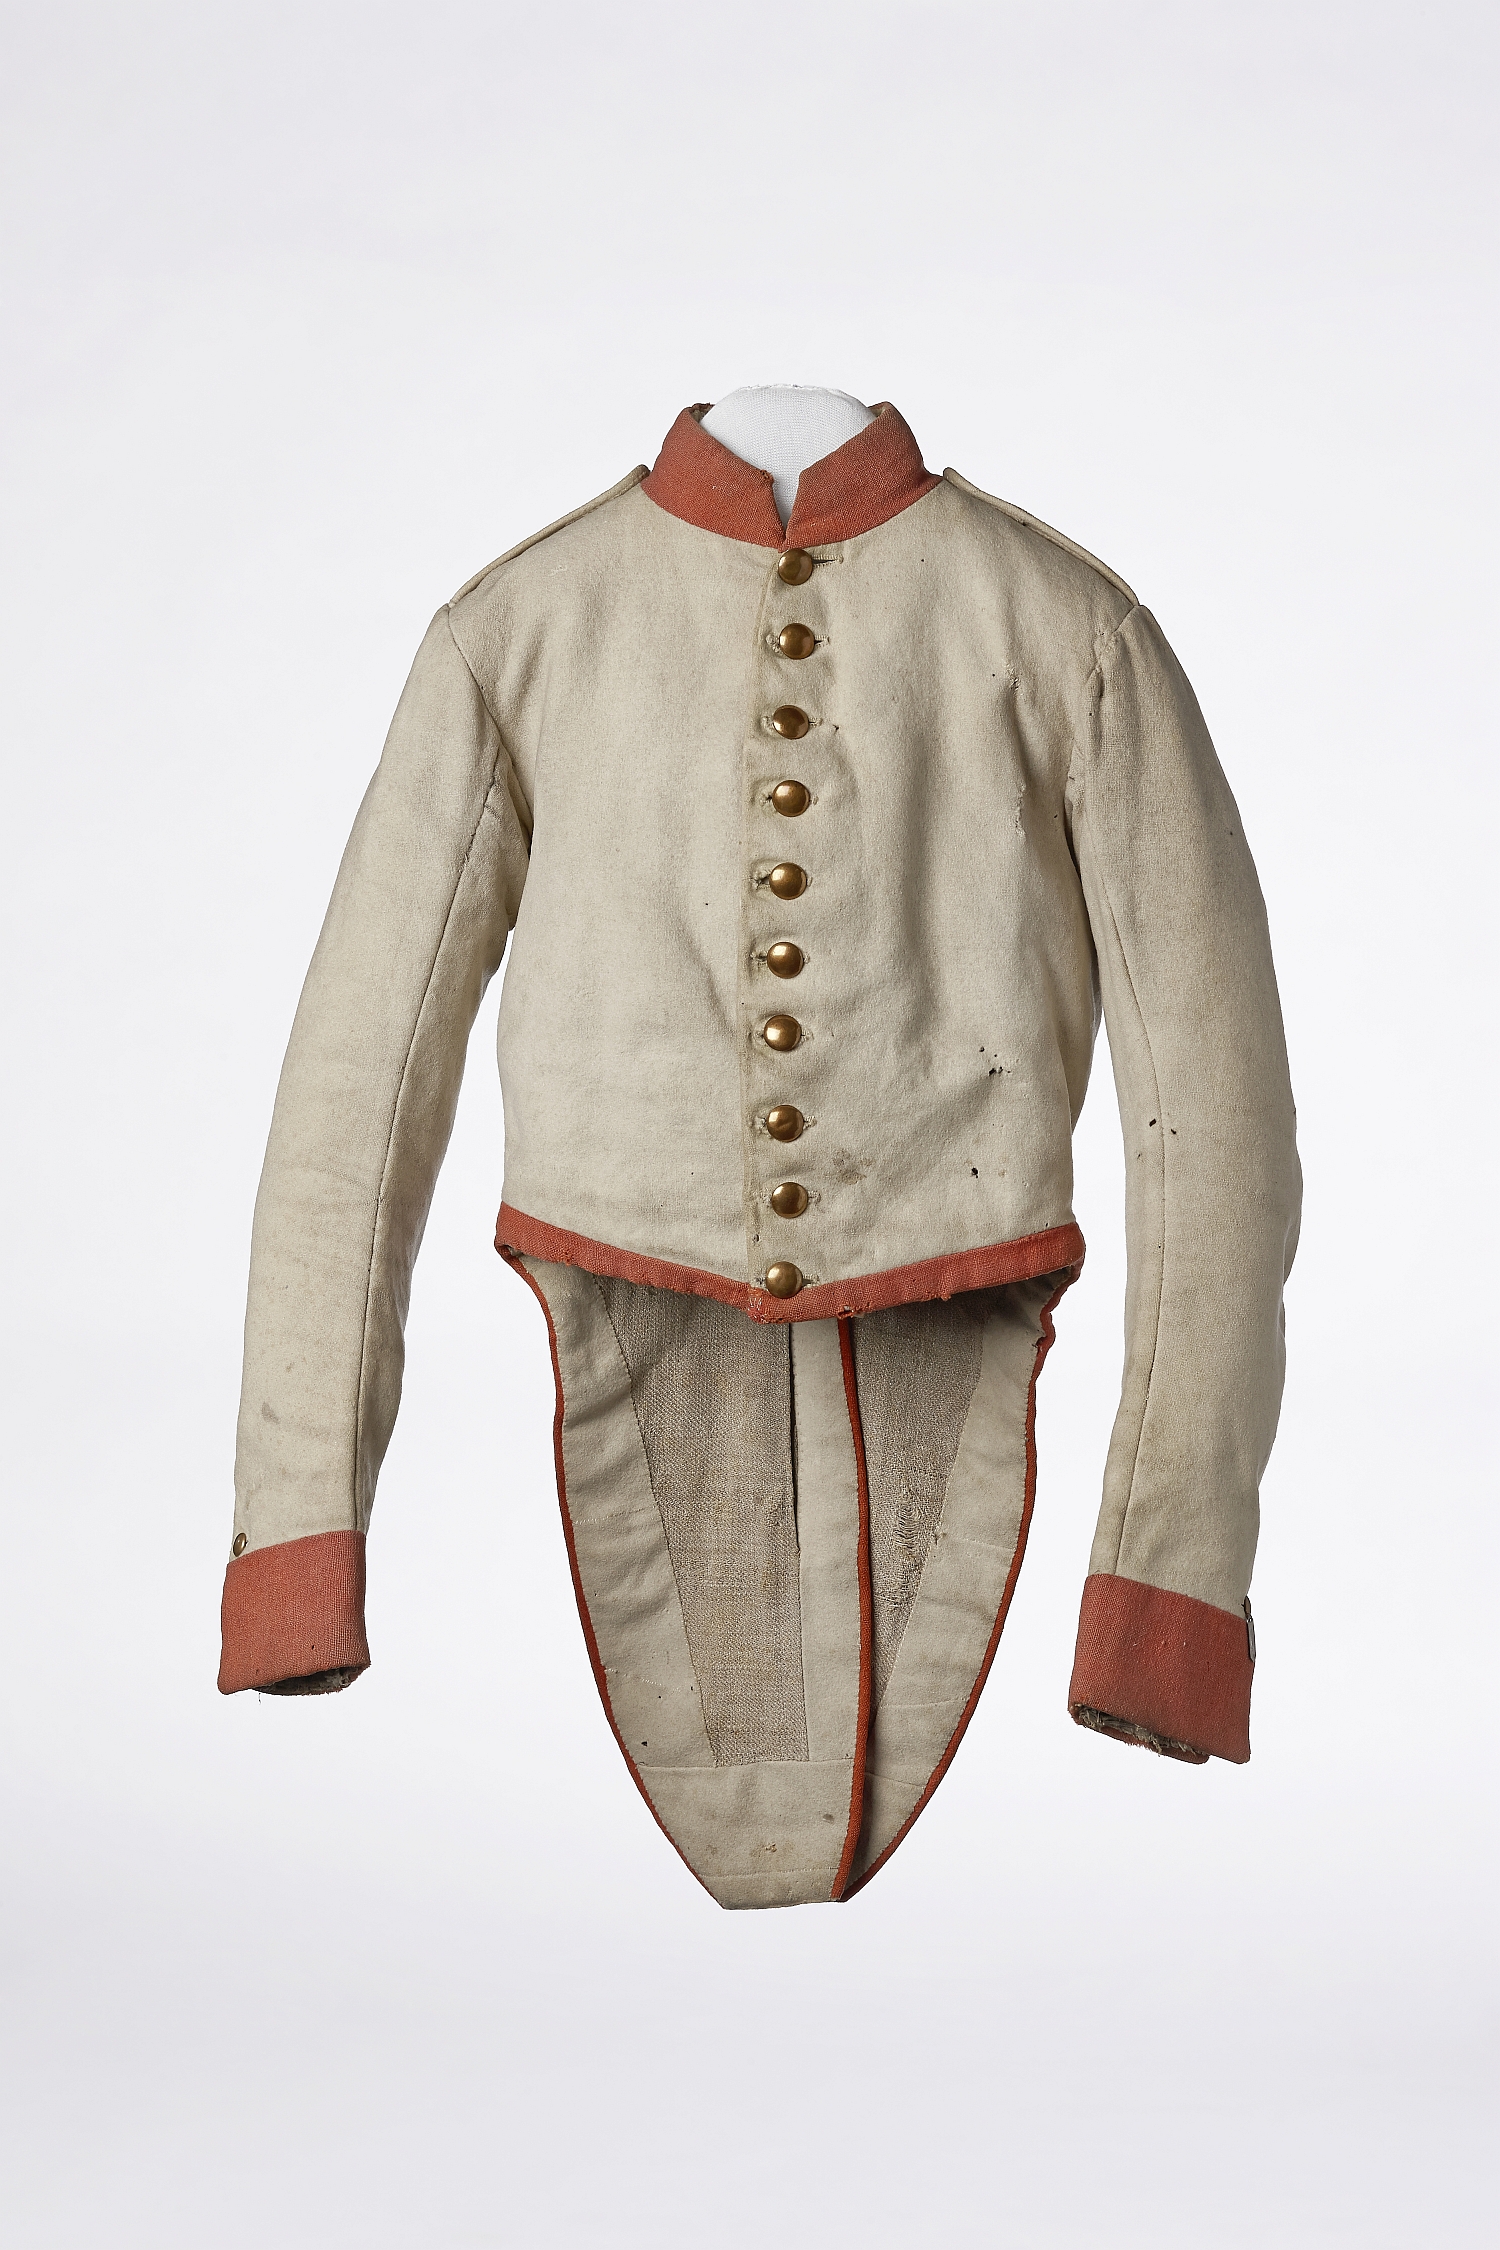 Uniform jacket of the imperial and royal infantry regiment “Jordis” No. 59 (later “Archduke Rainer”) after the adjustment regulation of 1836. Worn by Franz Riebenmayer, later master butcher, Linzergasse, inv. no. WA 2401